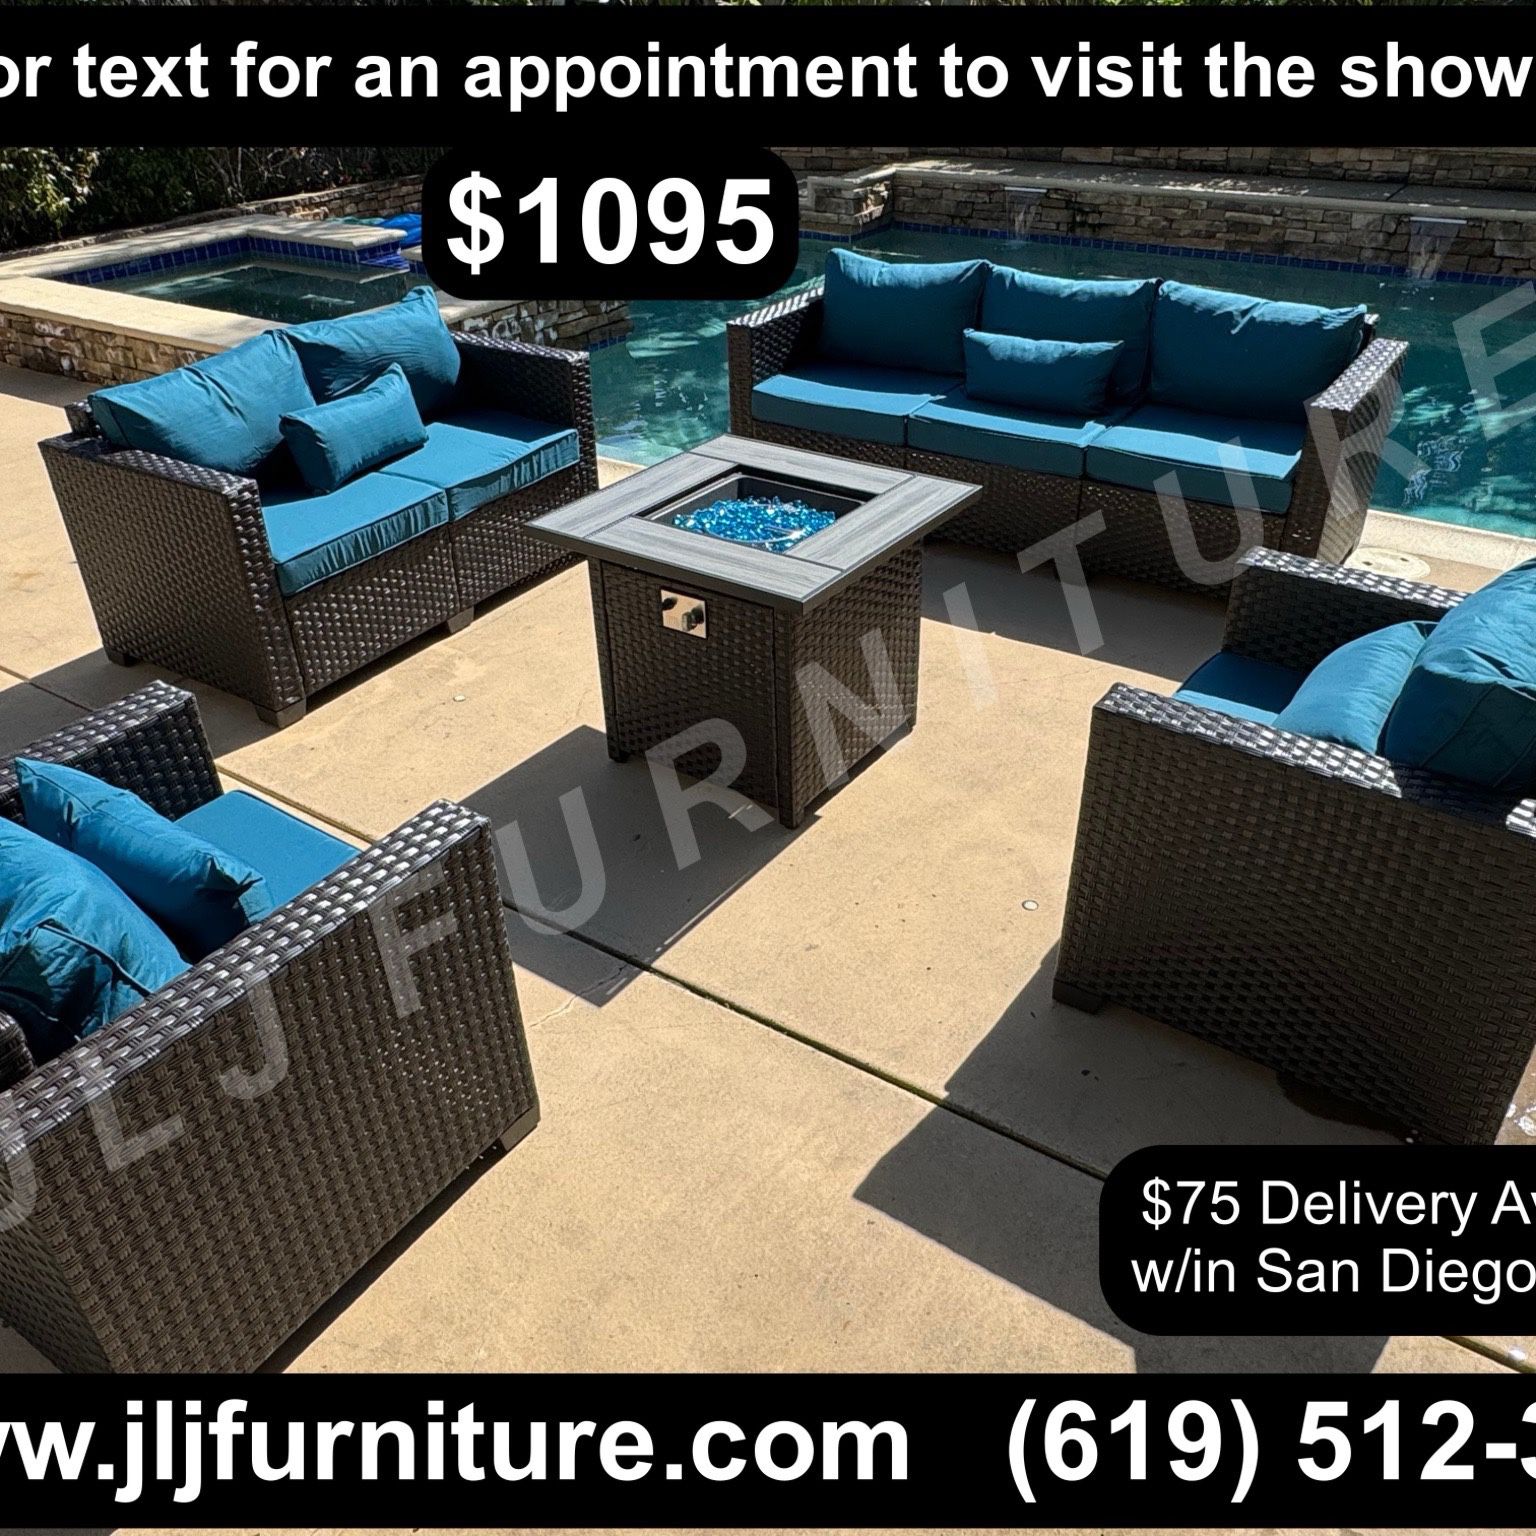 NEW🔥 Outdoor Patio Furniture Set Brown Wicker Peacock Blue Cushions 30" Firepit ASSEMBLED